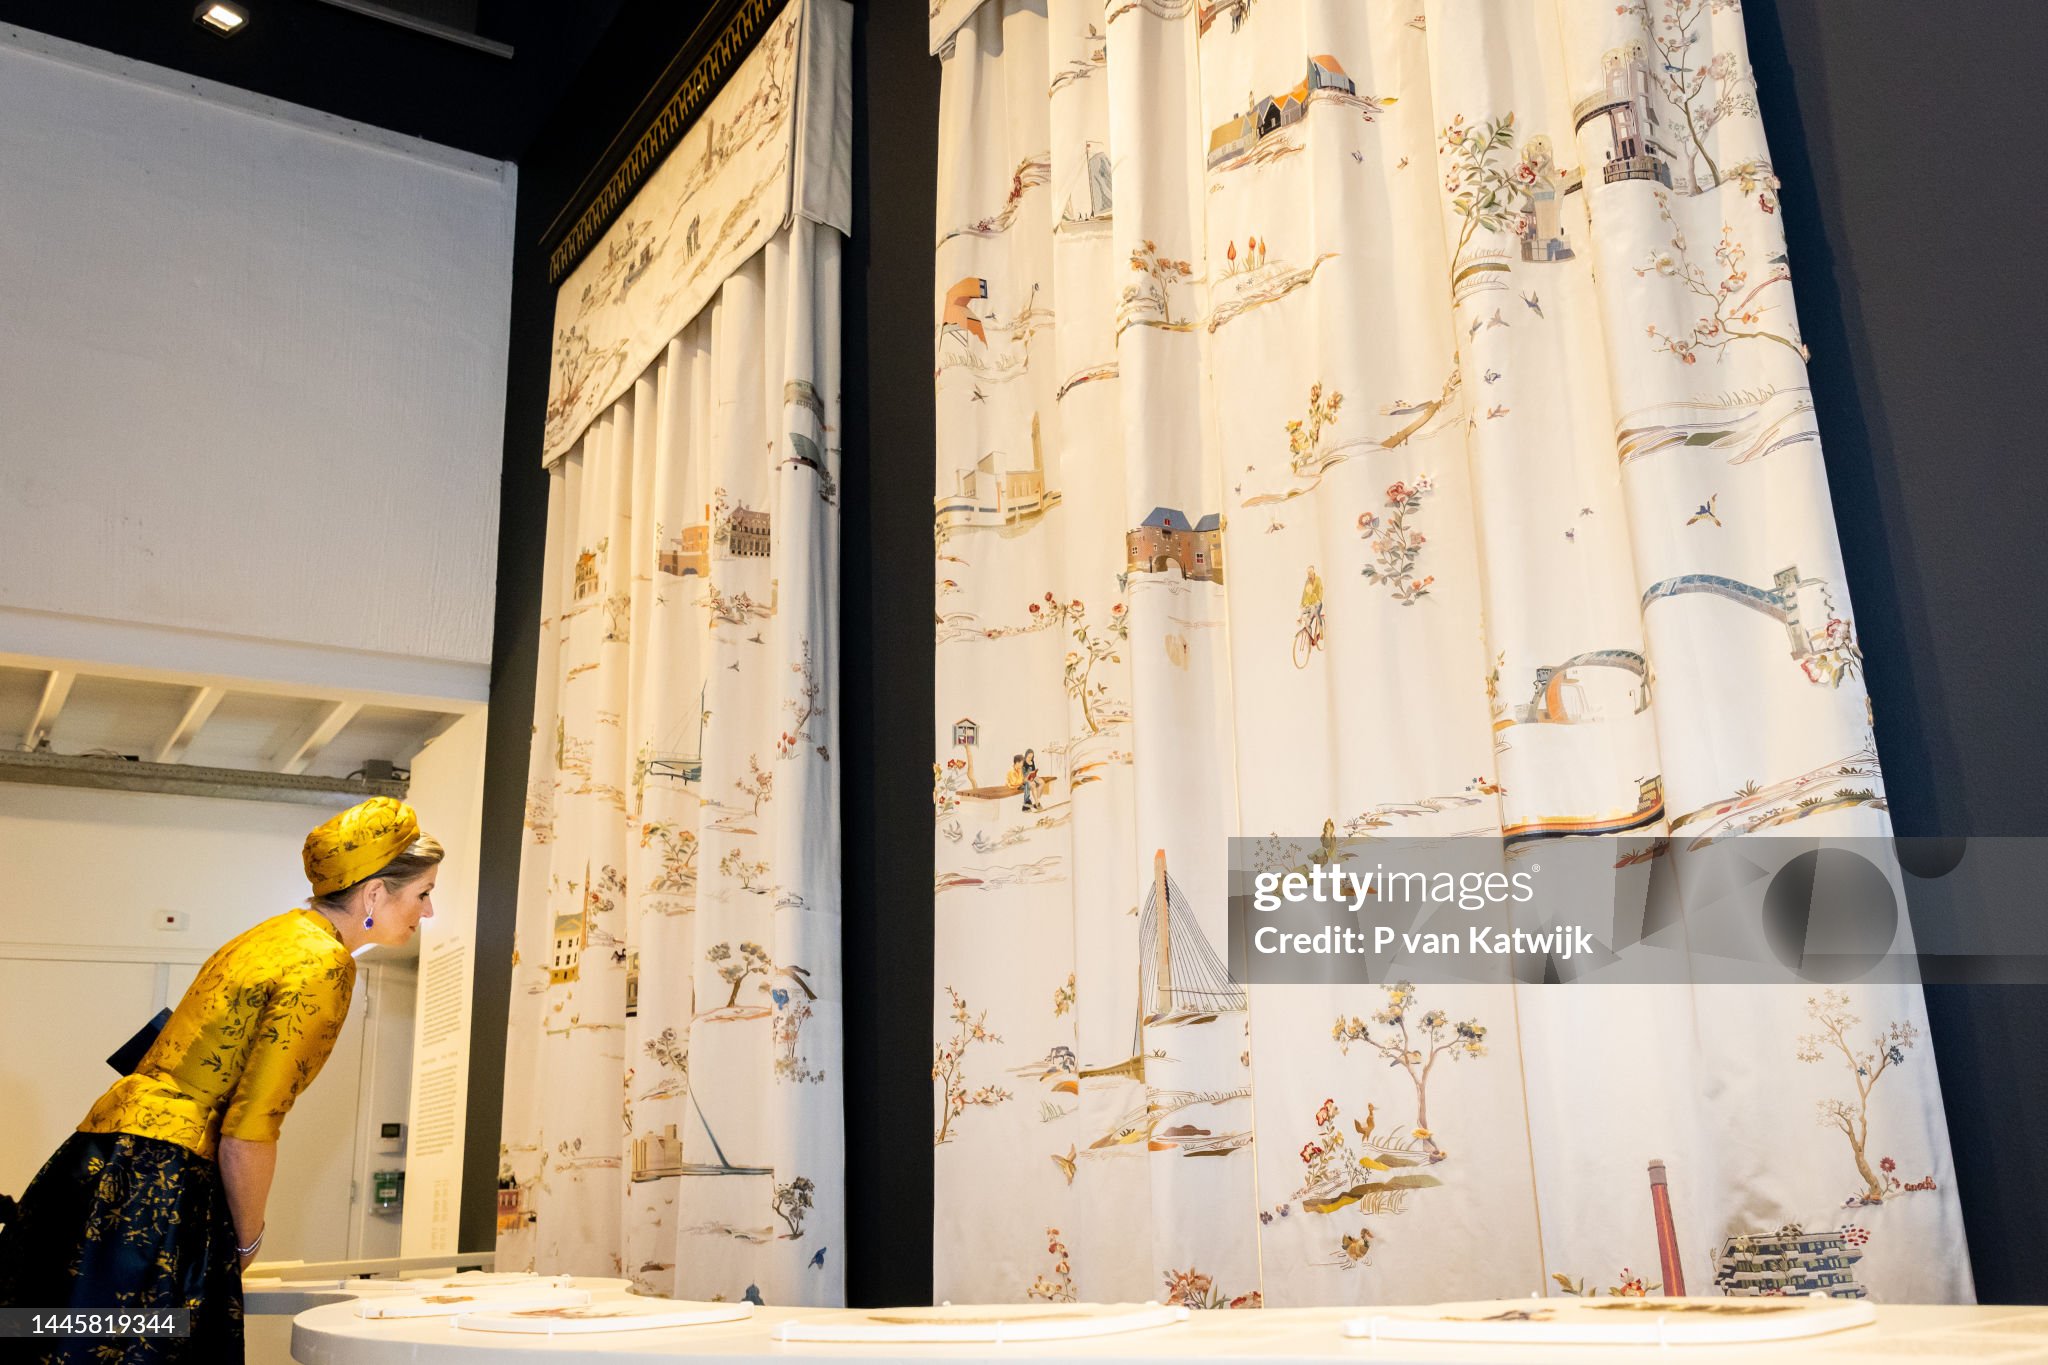 queen-maxima-of-the-netherlands-visits-textile-museum-to-present-her-new-curtains-for-palace.jpg?s=2048x2048&w=gi&k=20&c=rRBBQgTniCtI6wacTHUJQOUgDT4edPHMFL_IFWg7oyw=